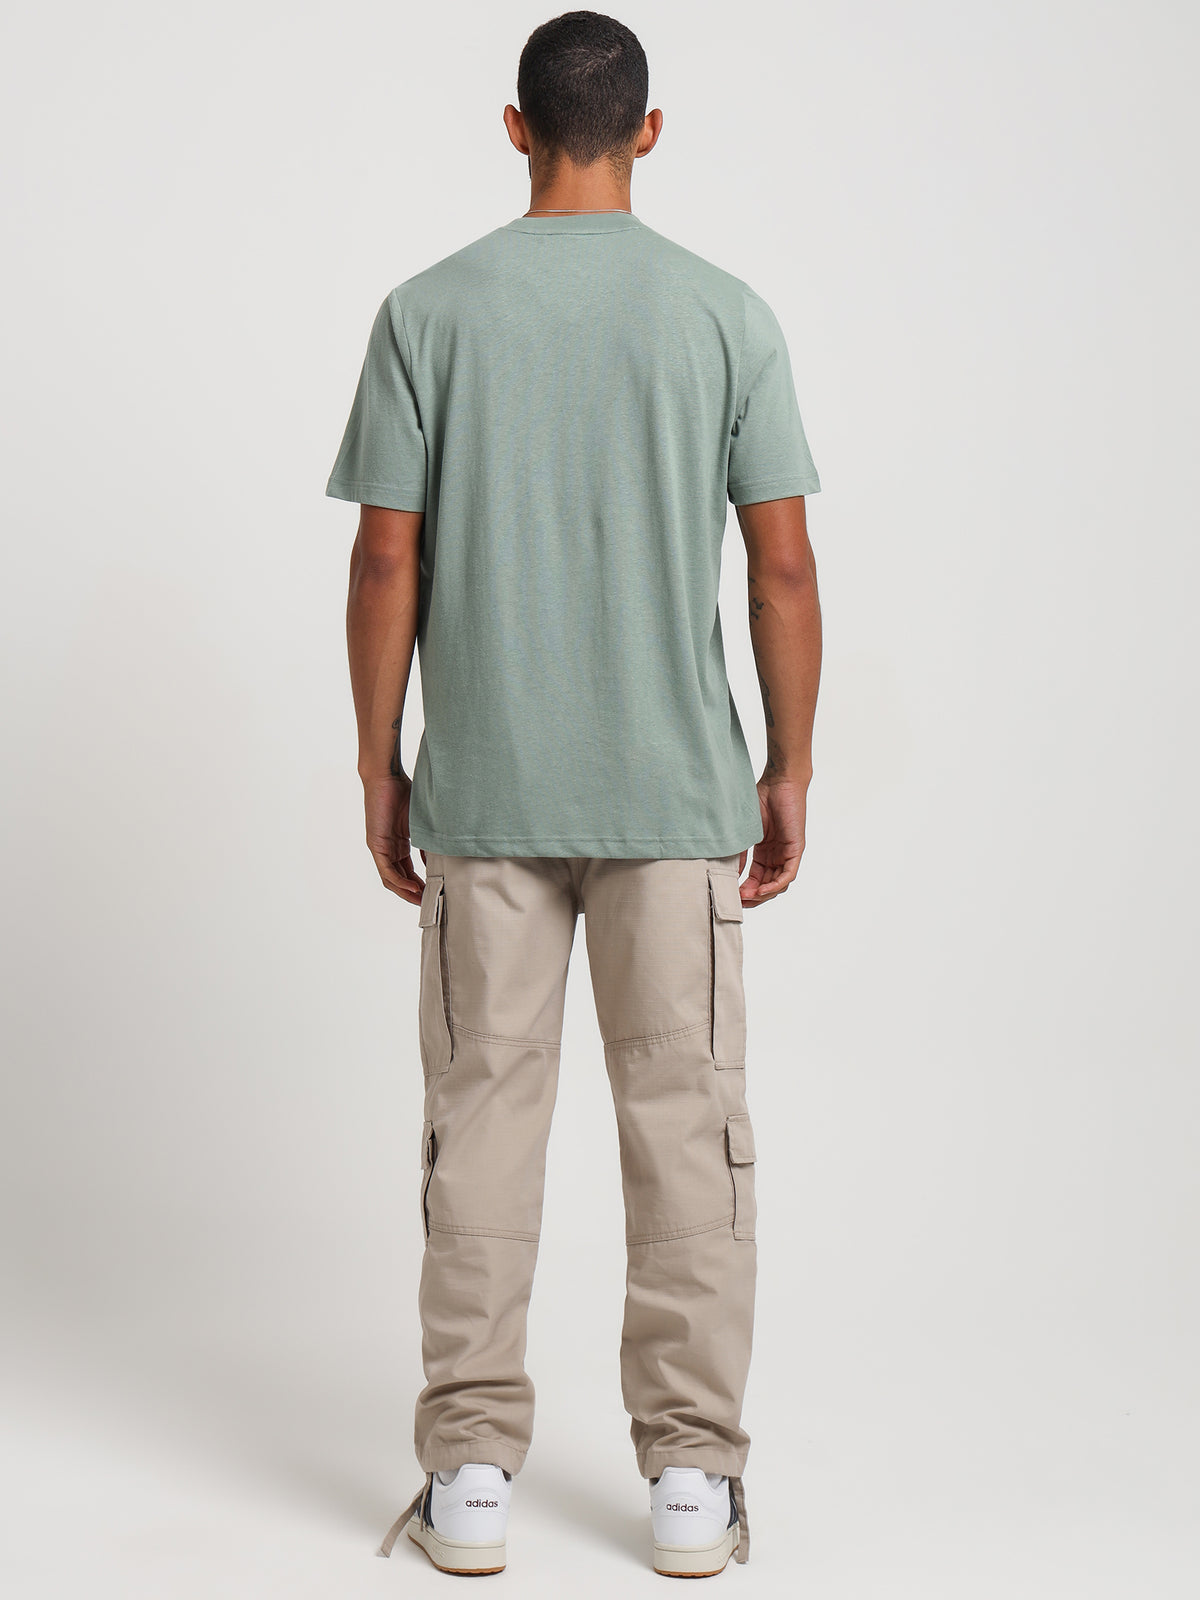 Essentials+ Made With Hemp T-Shirt in Silver Green